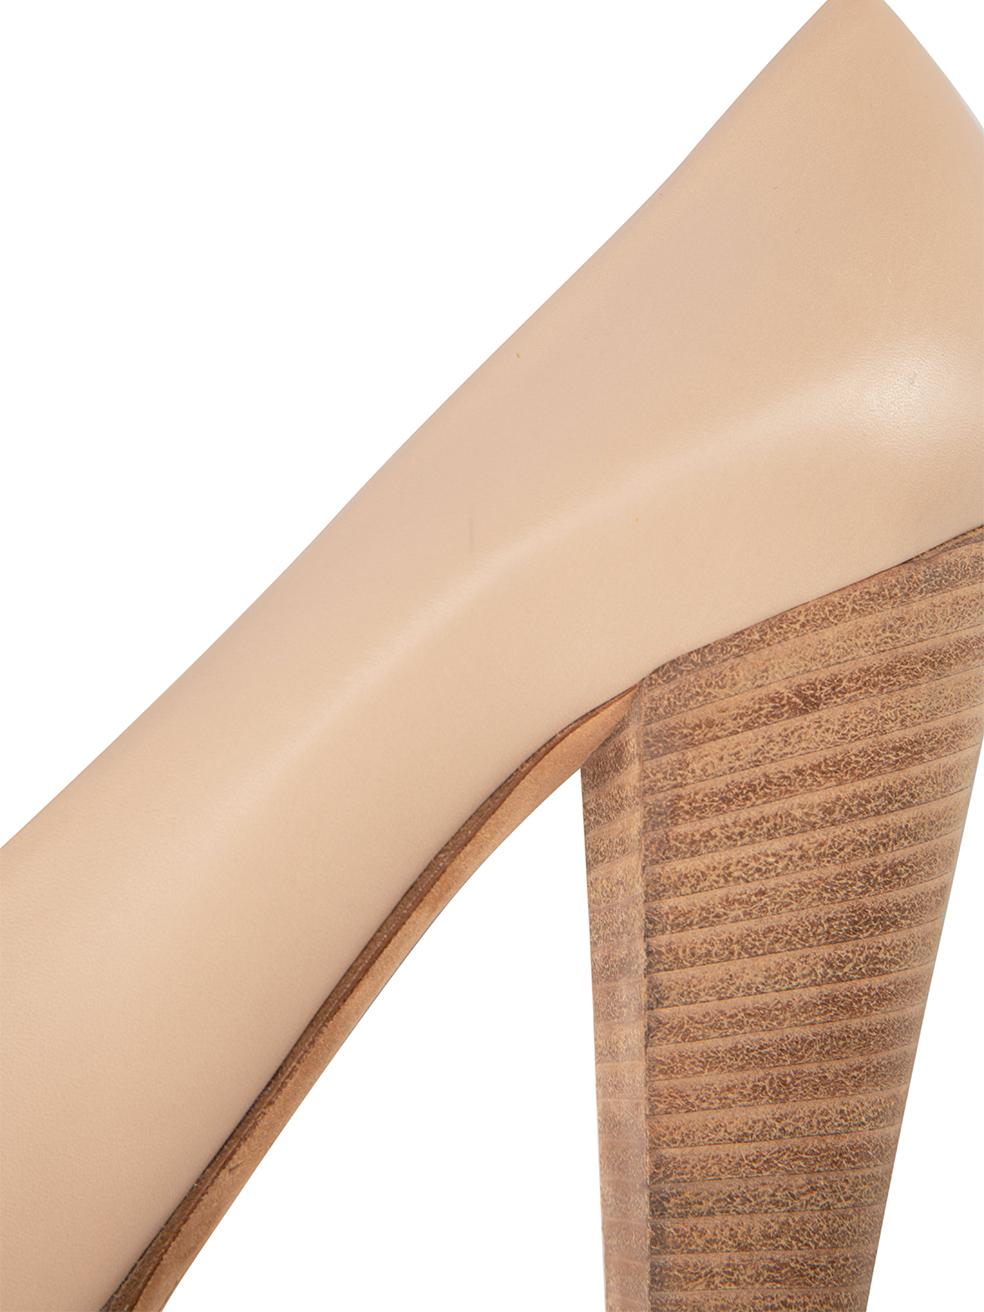 Céline Women's Nude Leather Stacked Heel Pumps For Sale 1